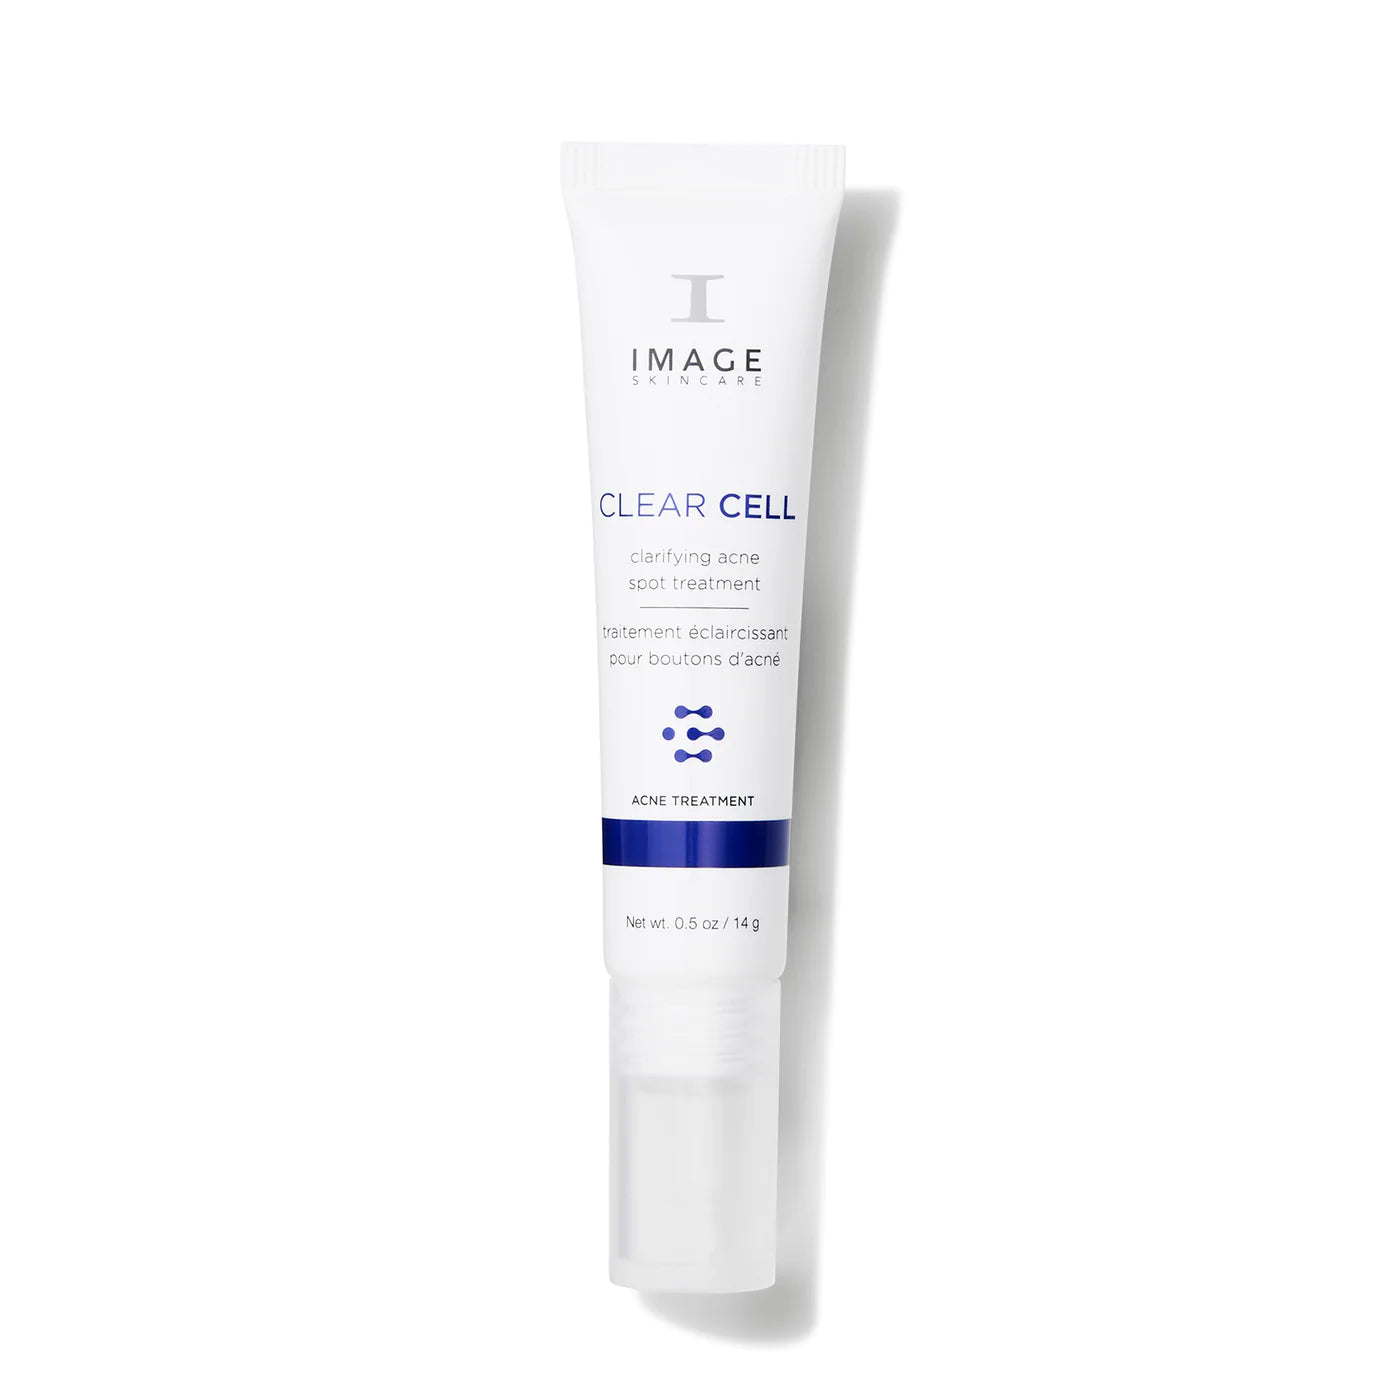 Clear Cell - Clarifying Acne Spot Treatment